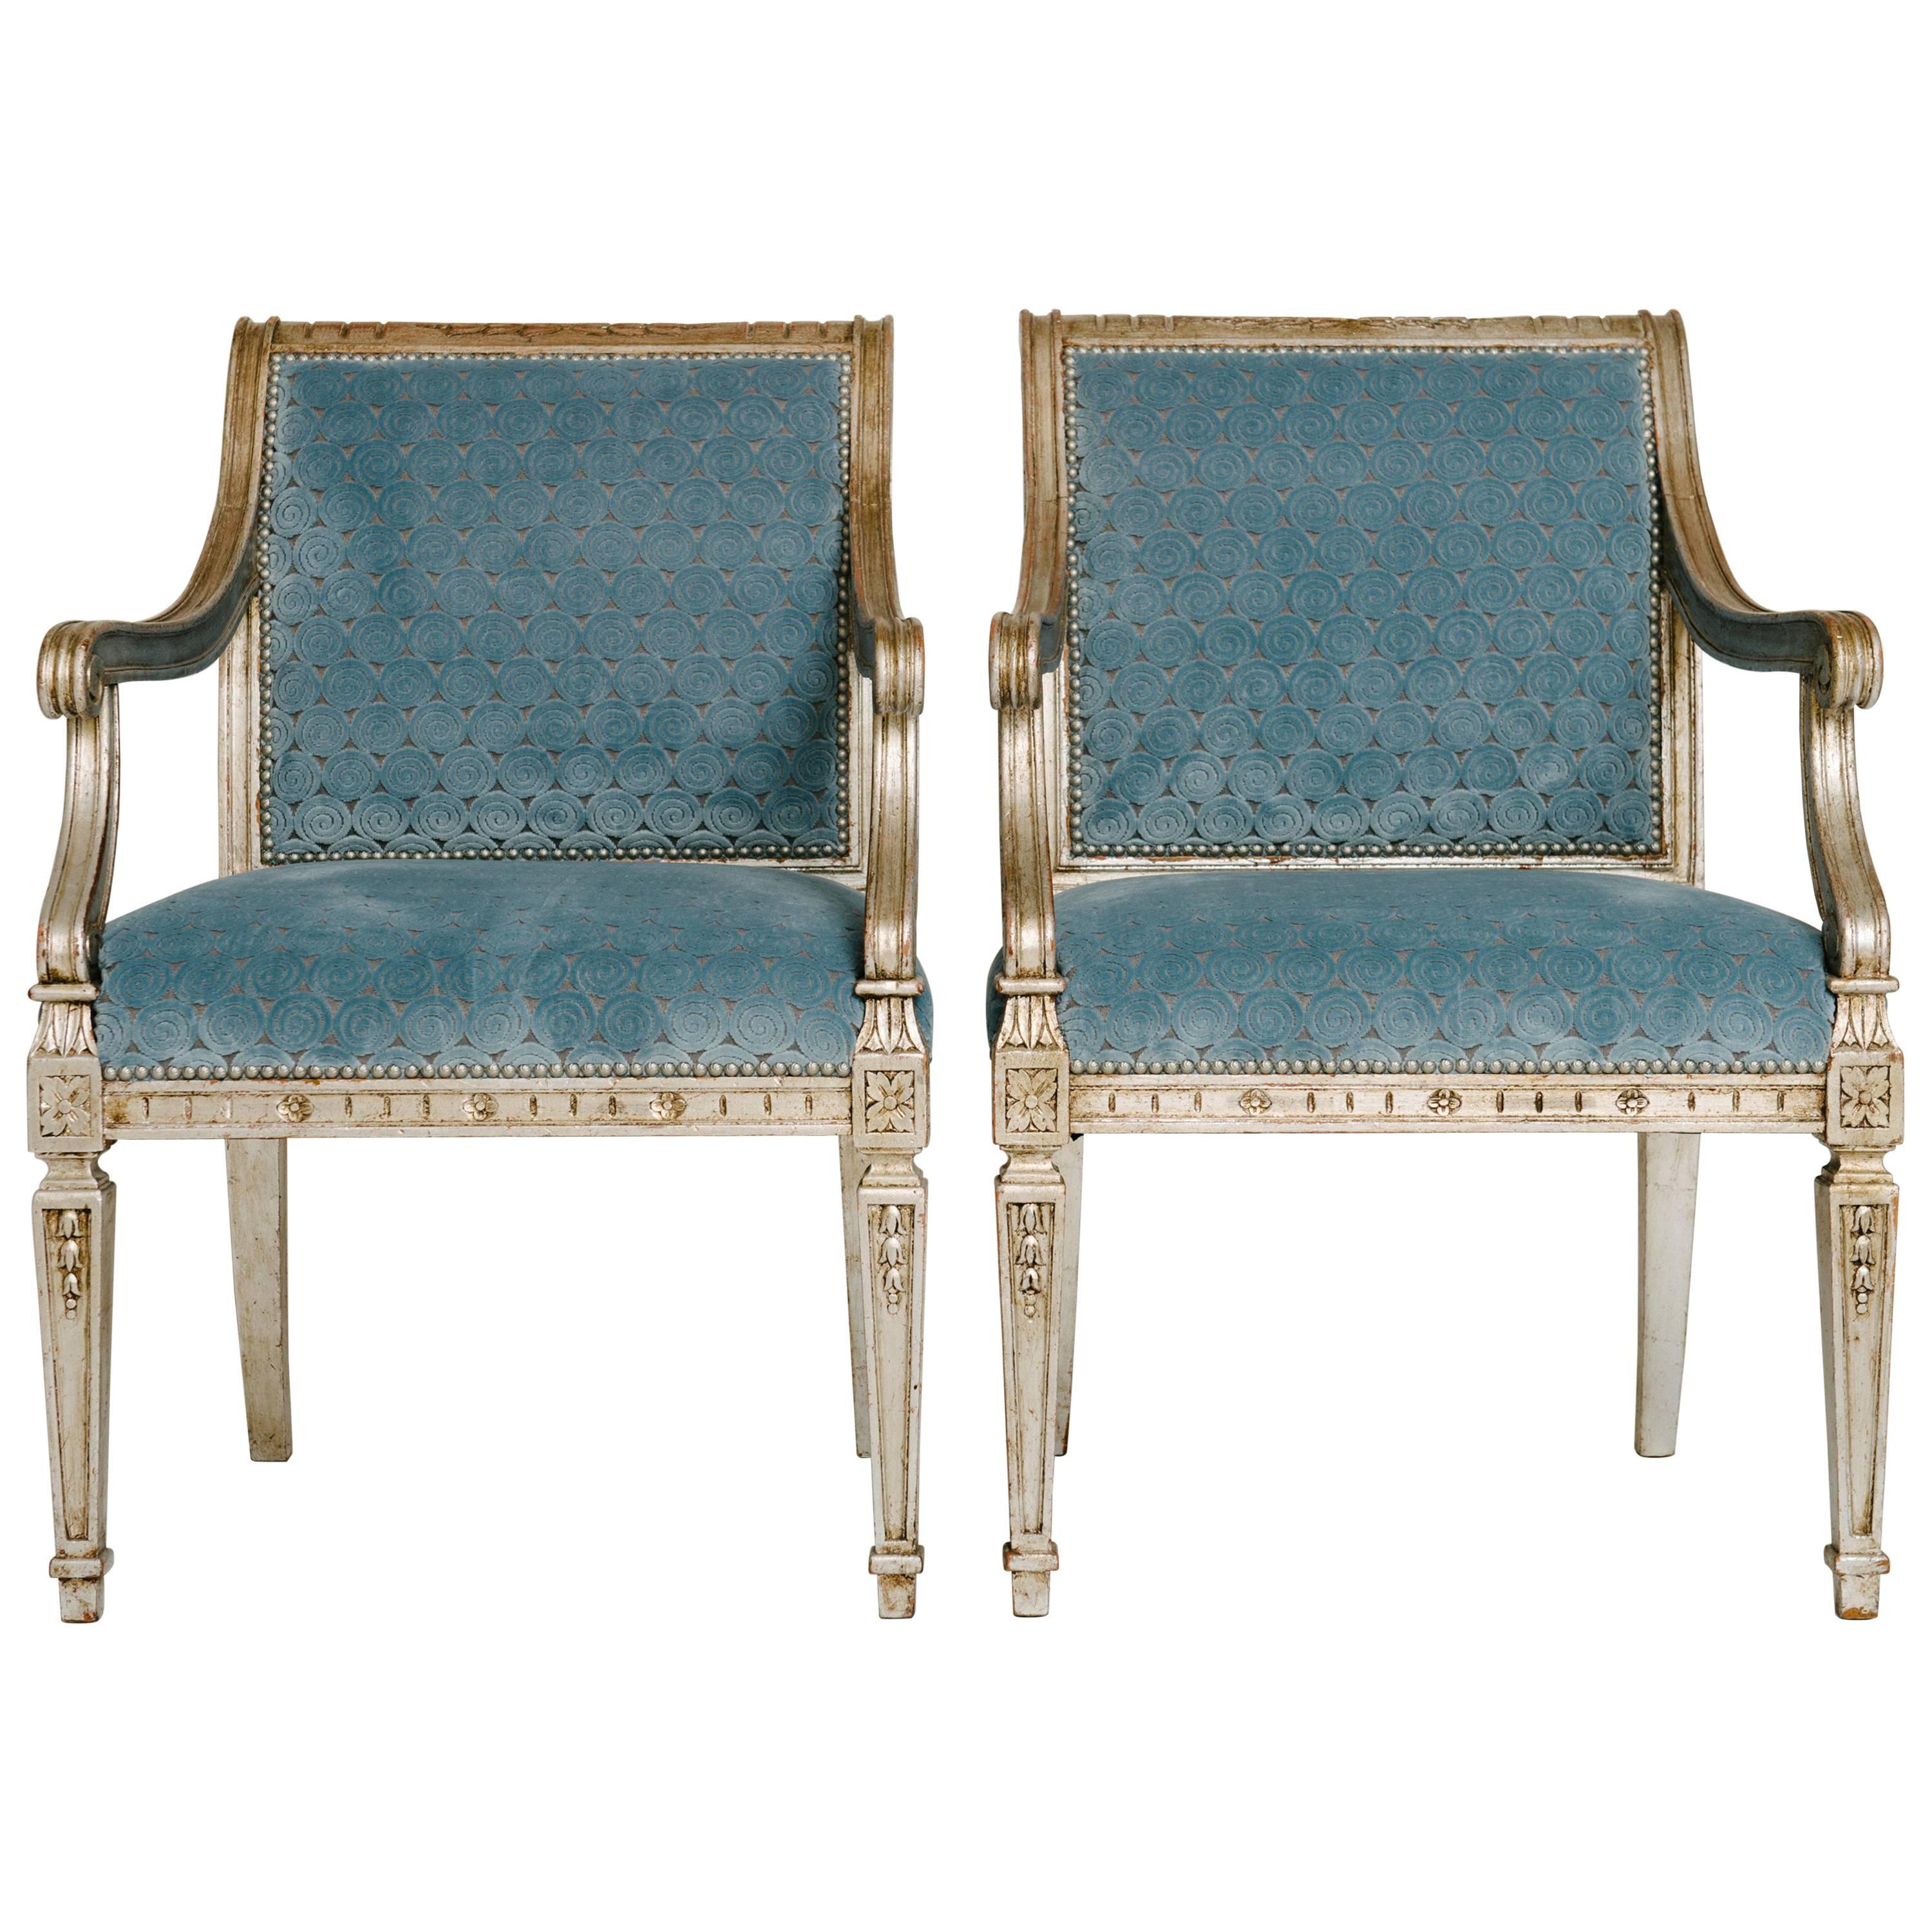 Pair of Silver Gilt Directoire Style Fauteuils